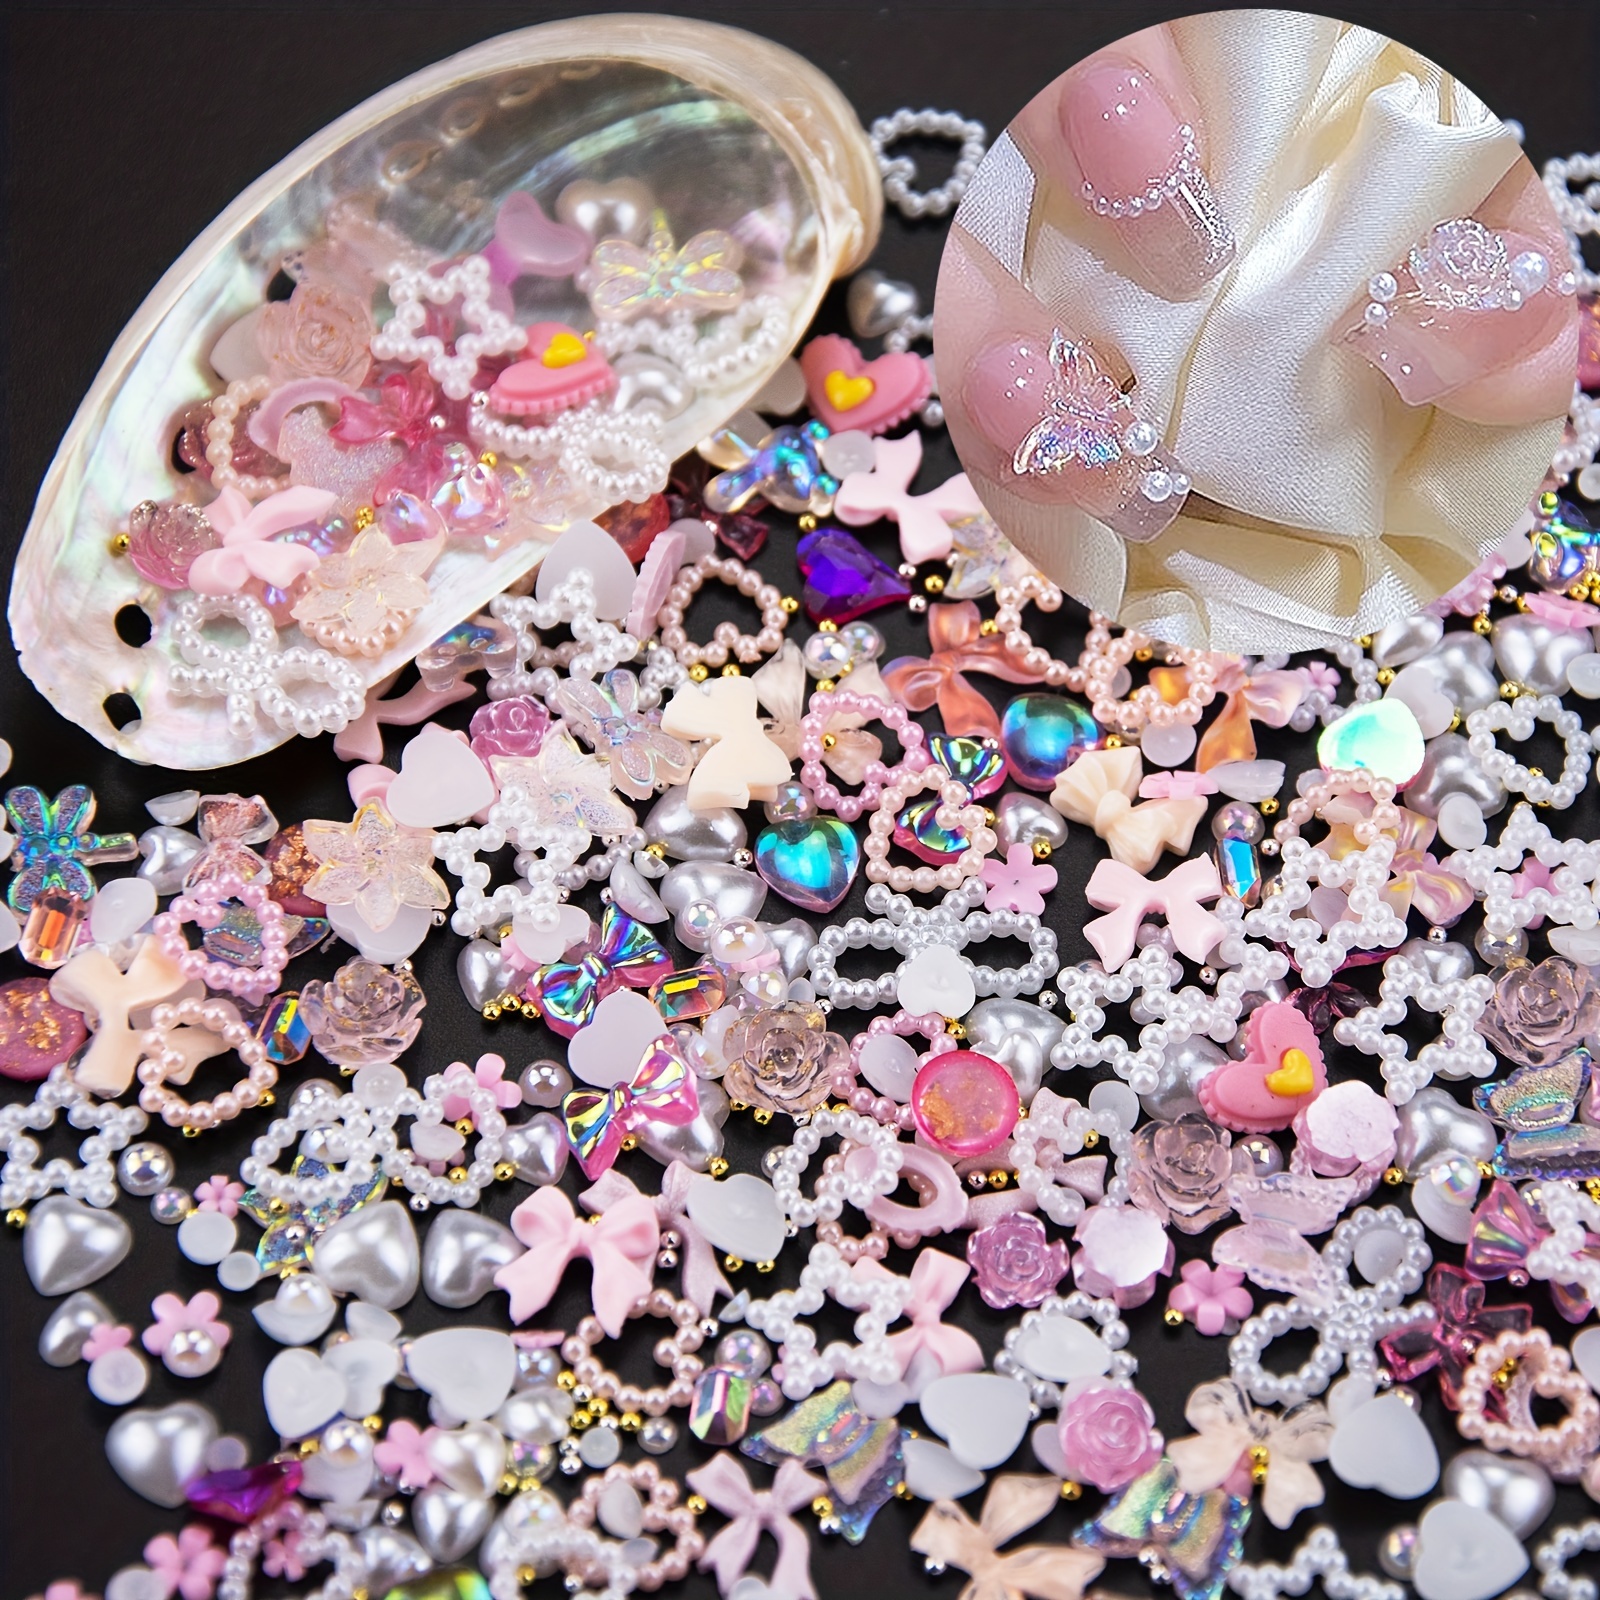 

600pcs Assorted Pearls 3d Nail Charms, Multi Shapes Heart Flower Bowknot Nail Charms Mix Heart Star Bows Round White Pearls Nail Beads Charms For Manicure Crafts Jewelry Accessories